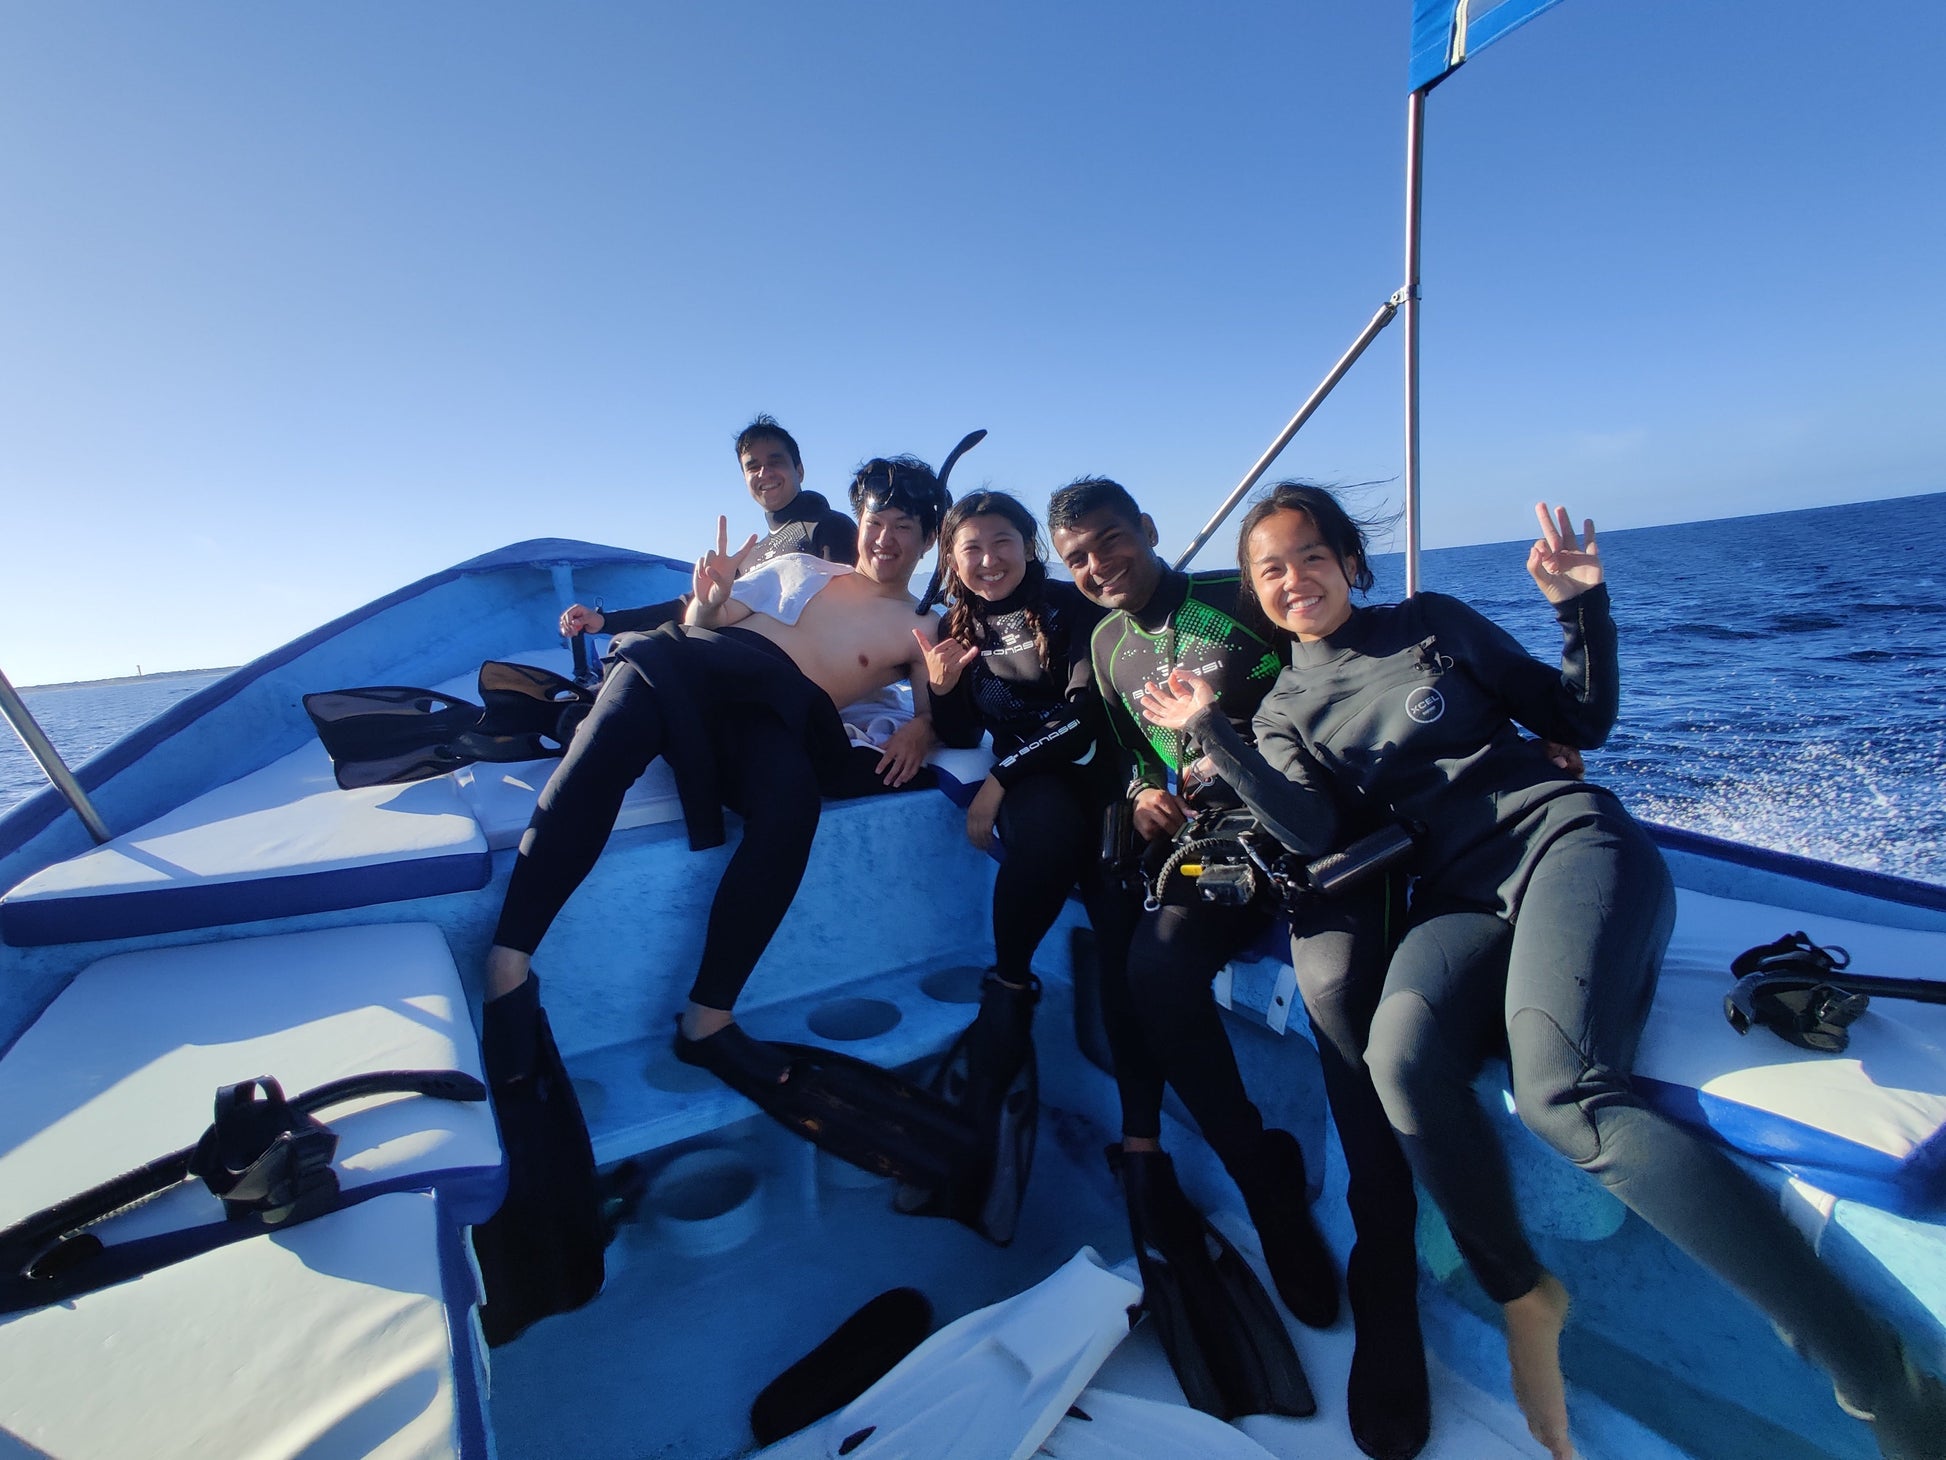 Small group travel participants smiling on the boat after completing a scuba diving session in Los Cabos.